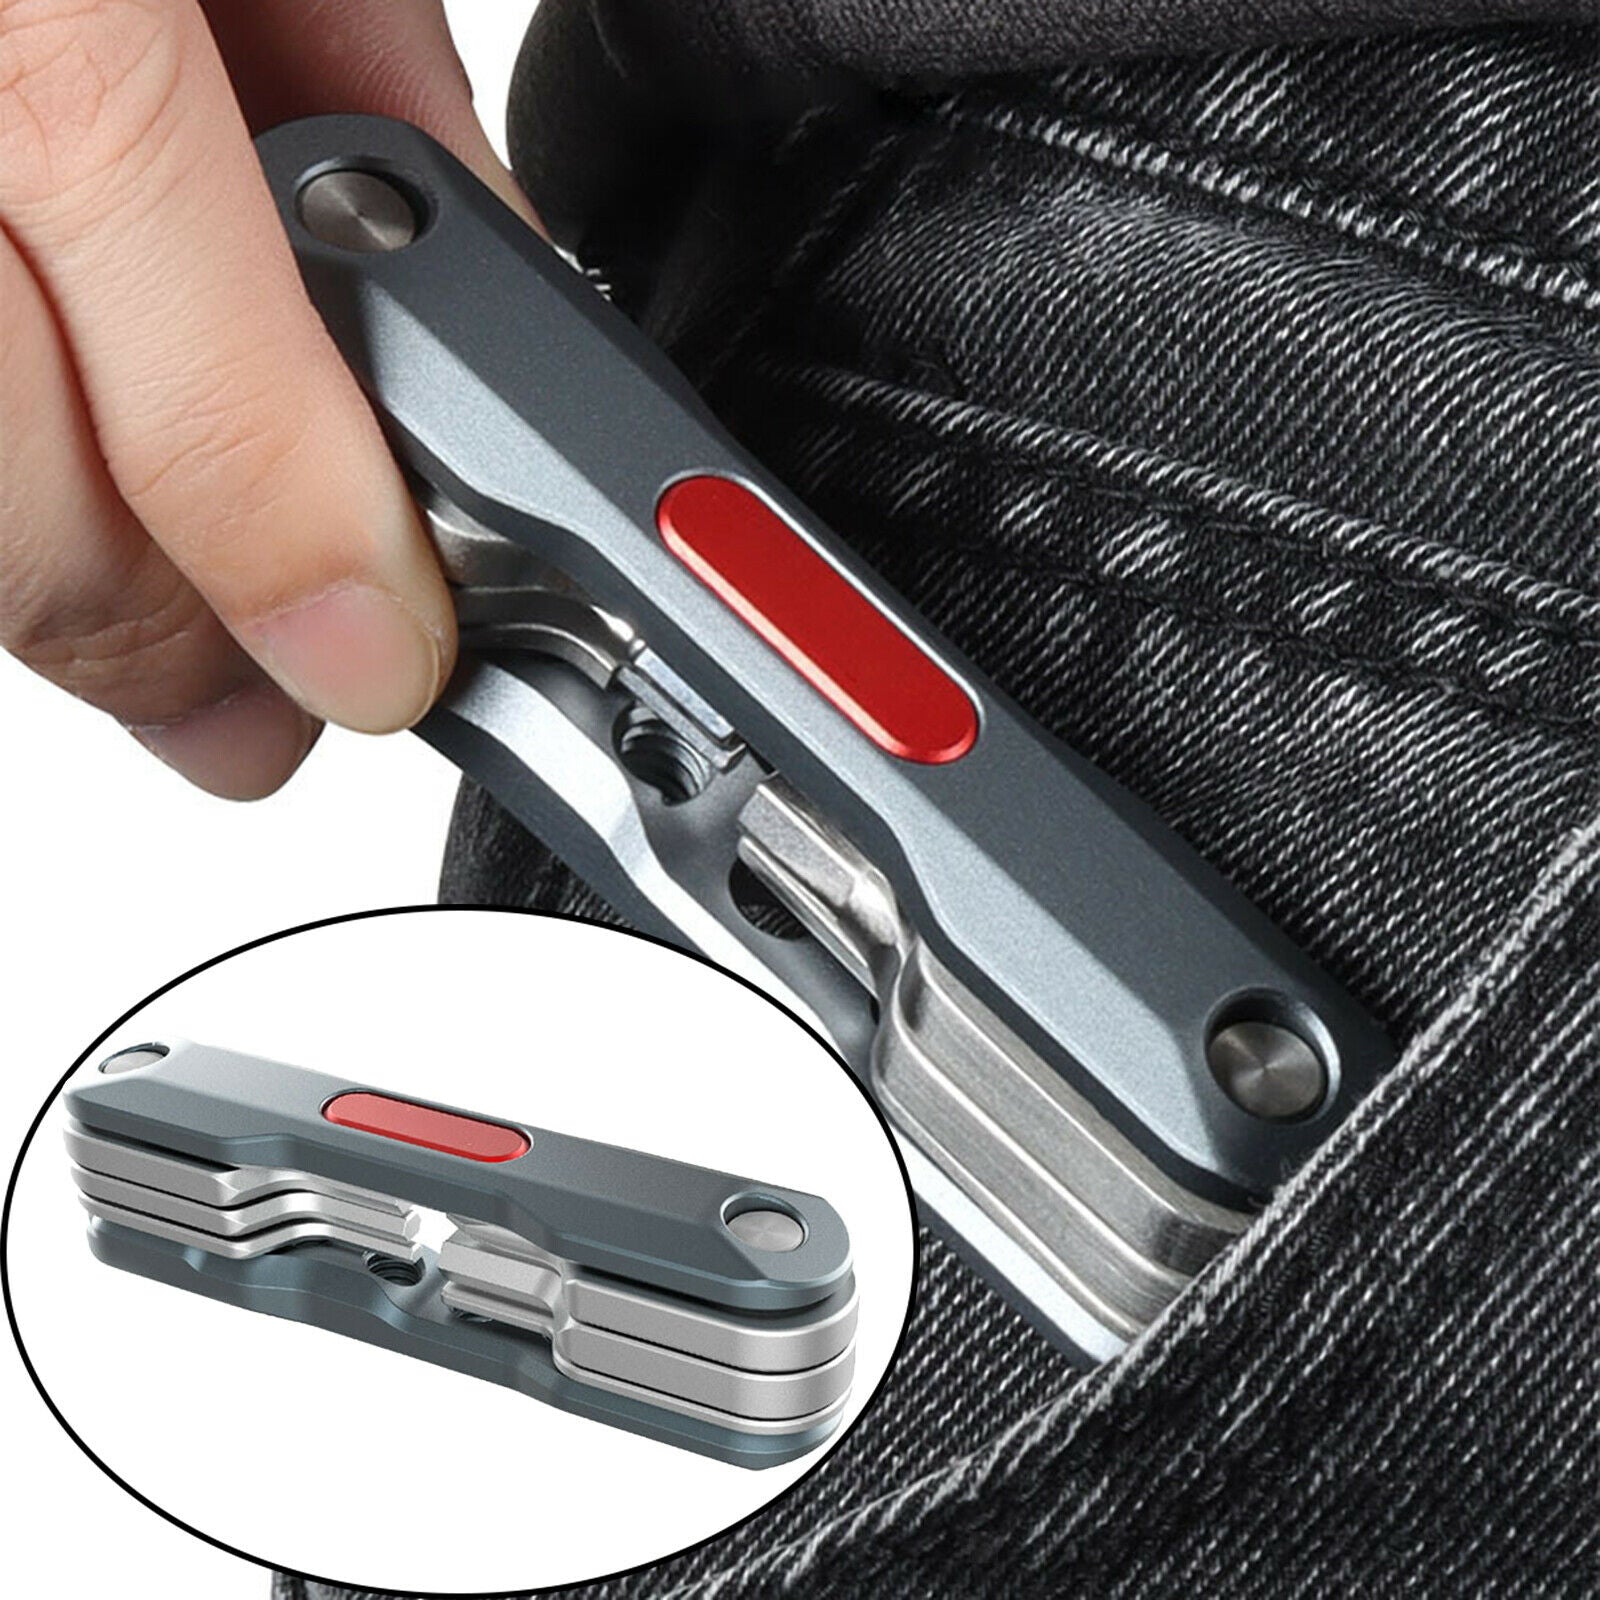 6-in-1 Universal Folding Tool Set with Screwdrivers Portable for DSLR Camera